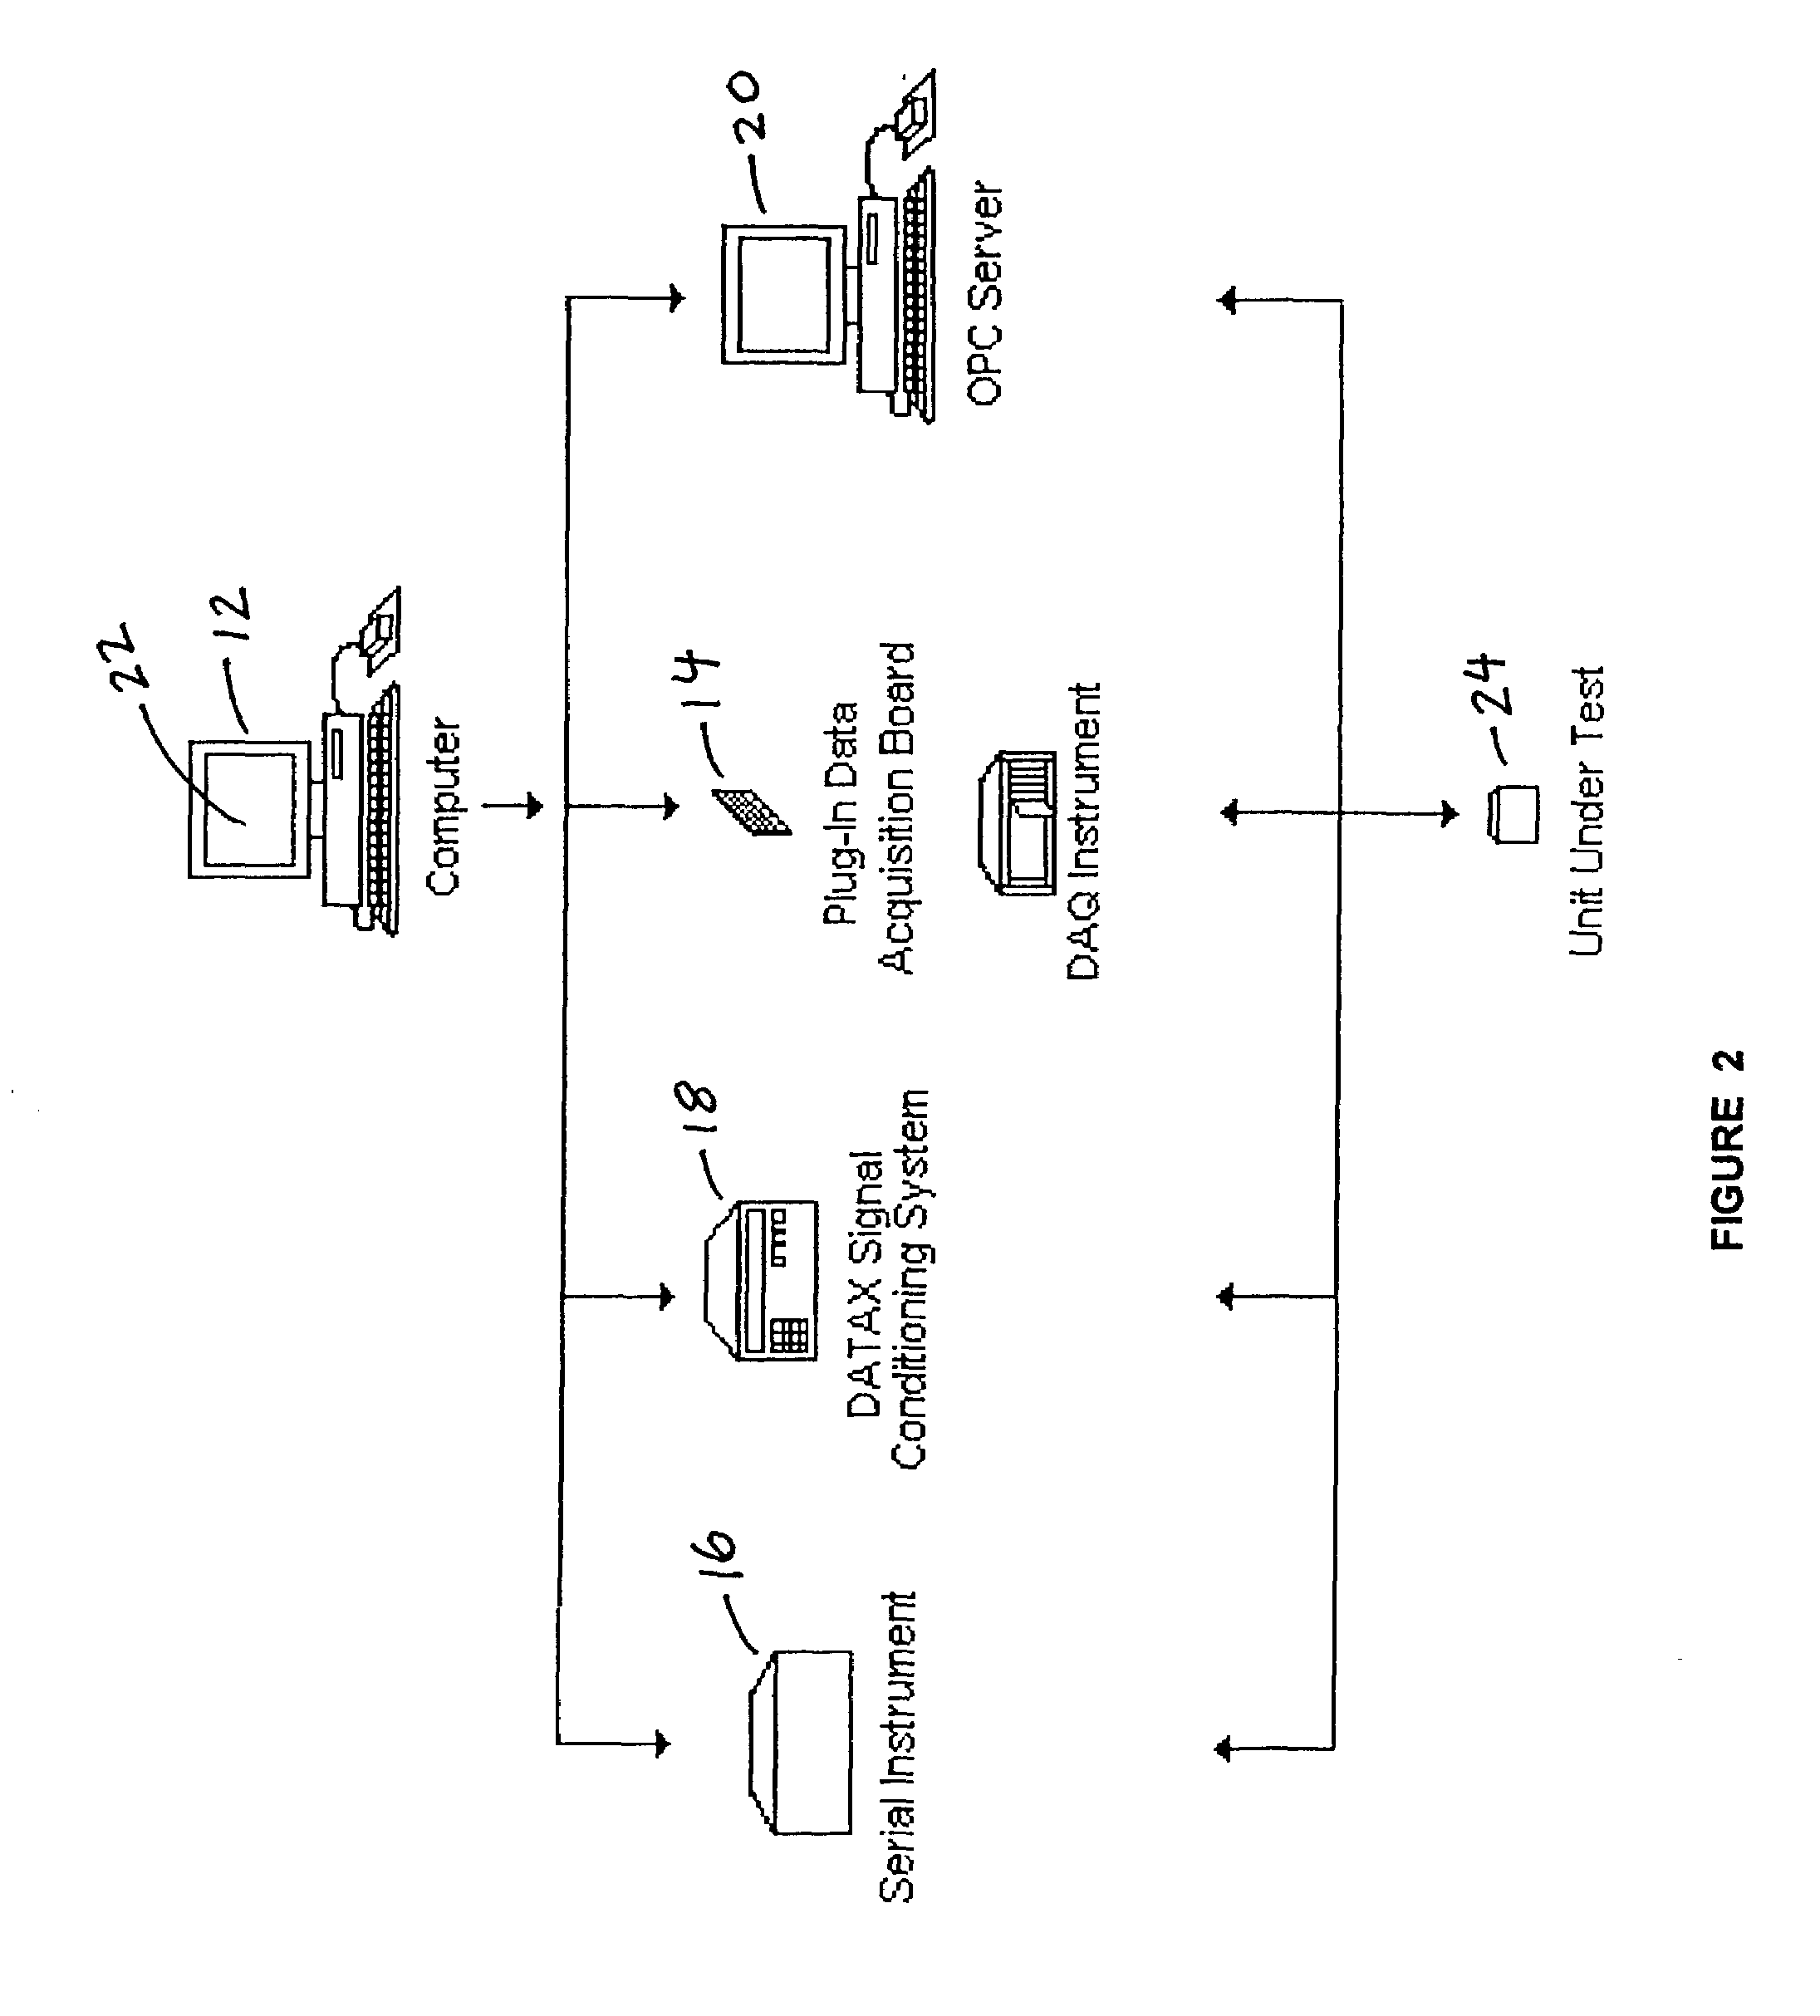 Graphical application development system for test, measurement and process control applications